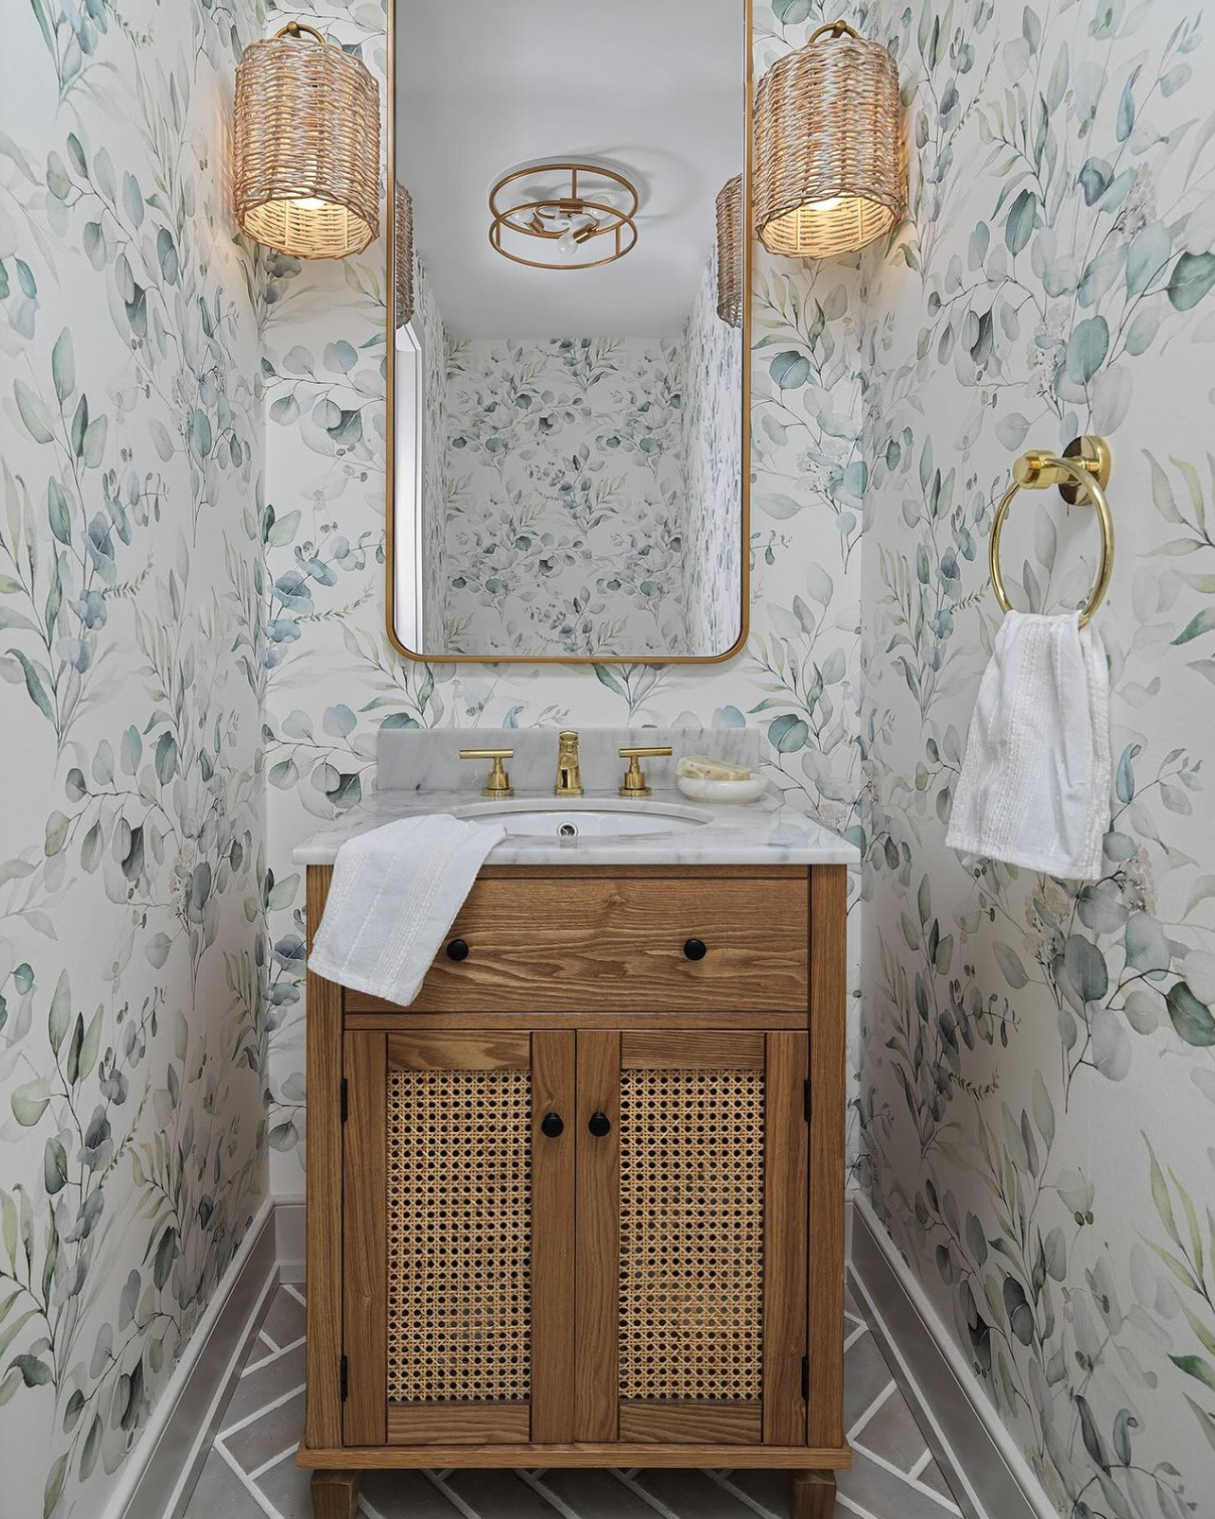 Luxurious bathroom accented with Green Leaves and Branches Wallpaper, wooden vanity, and warm lighting, offering an organic, spa-like retreat.